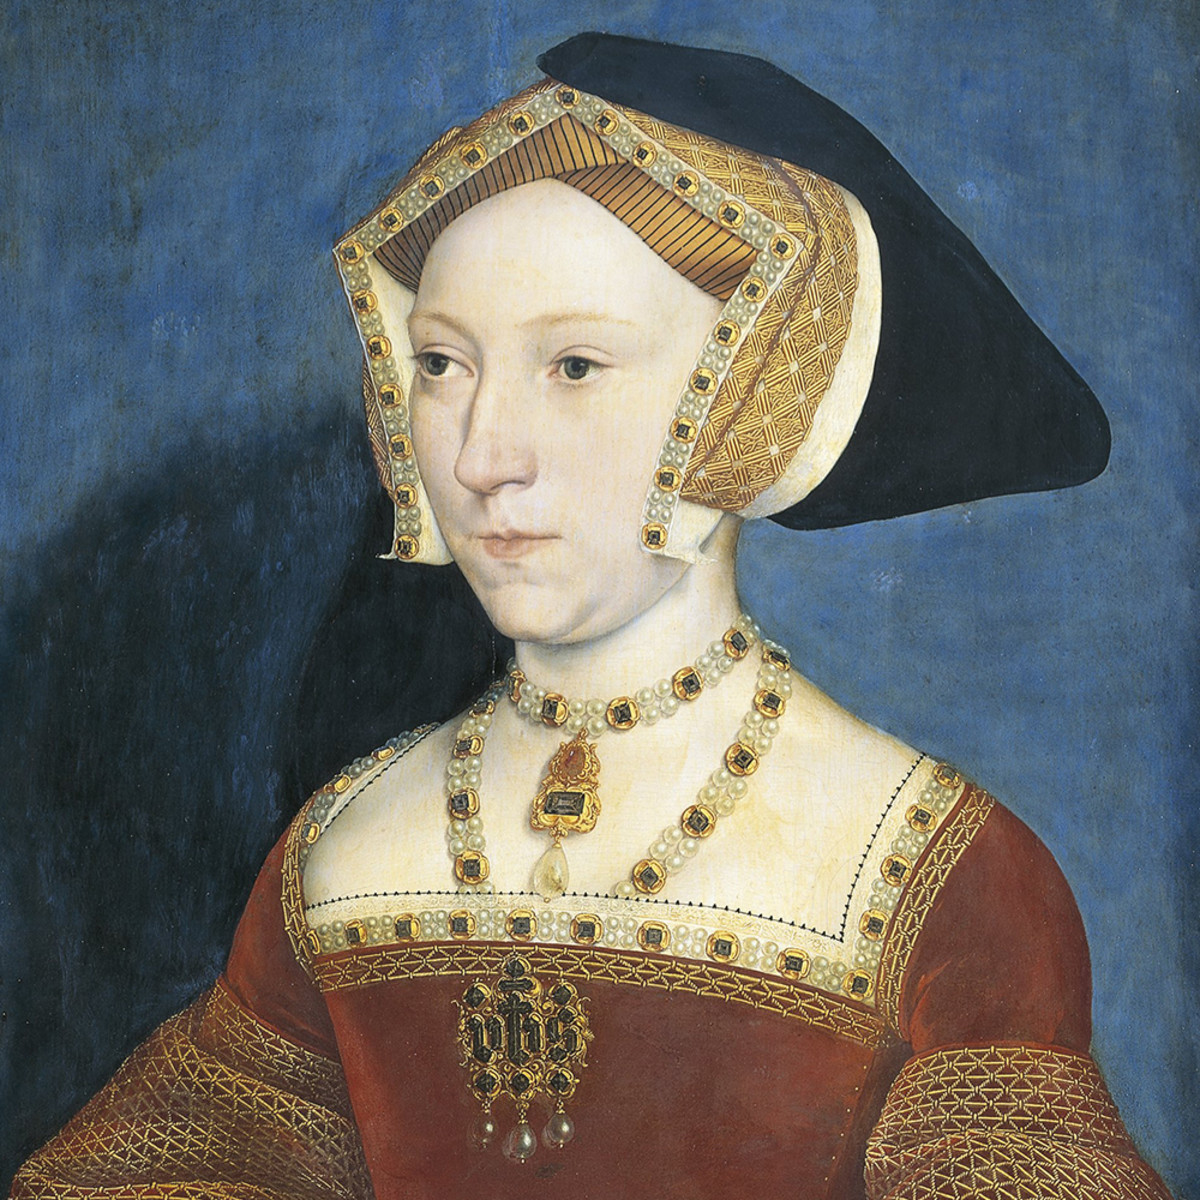 King Henry Viii's Wives: Most Risked Death Or Divorce